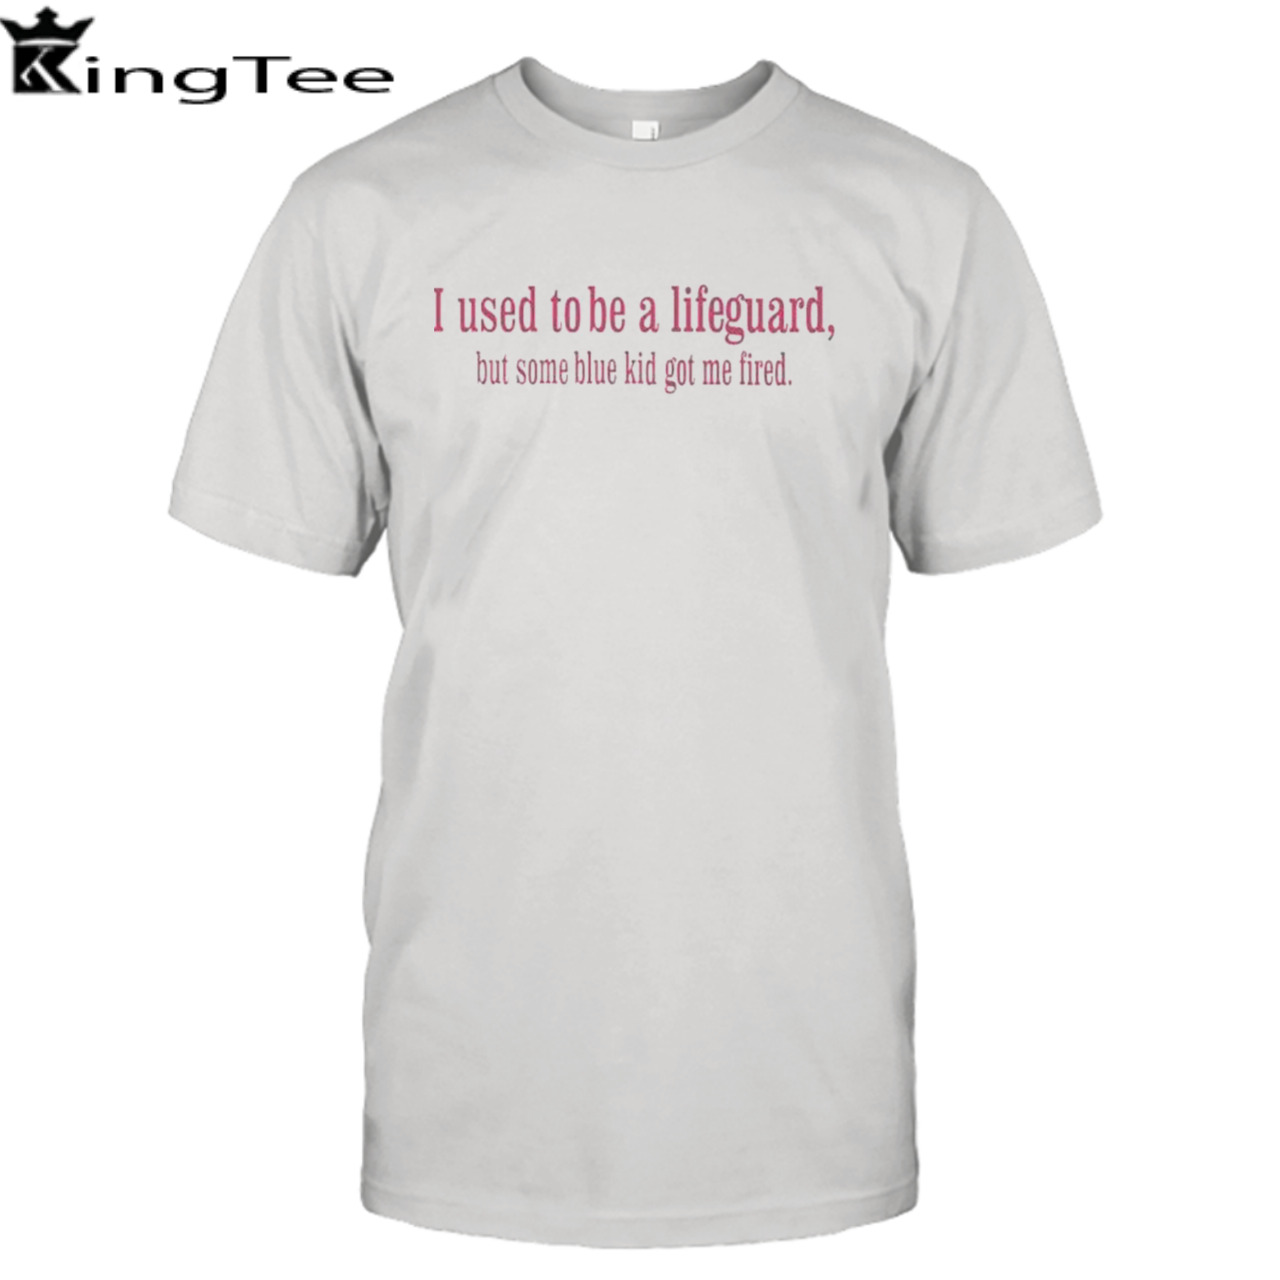 I used to be a lifeguard but some blue kid got me fired shirt